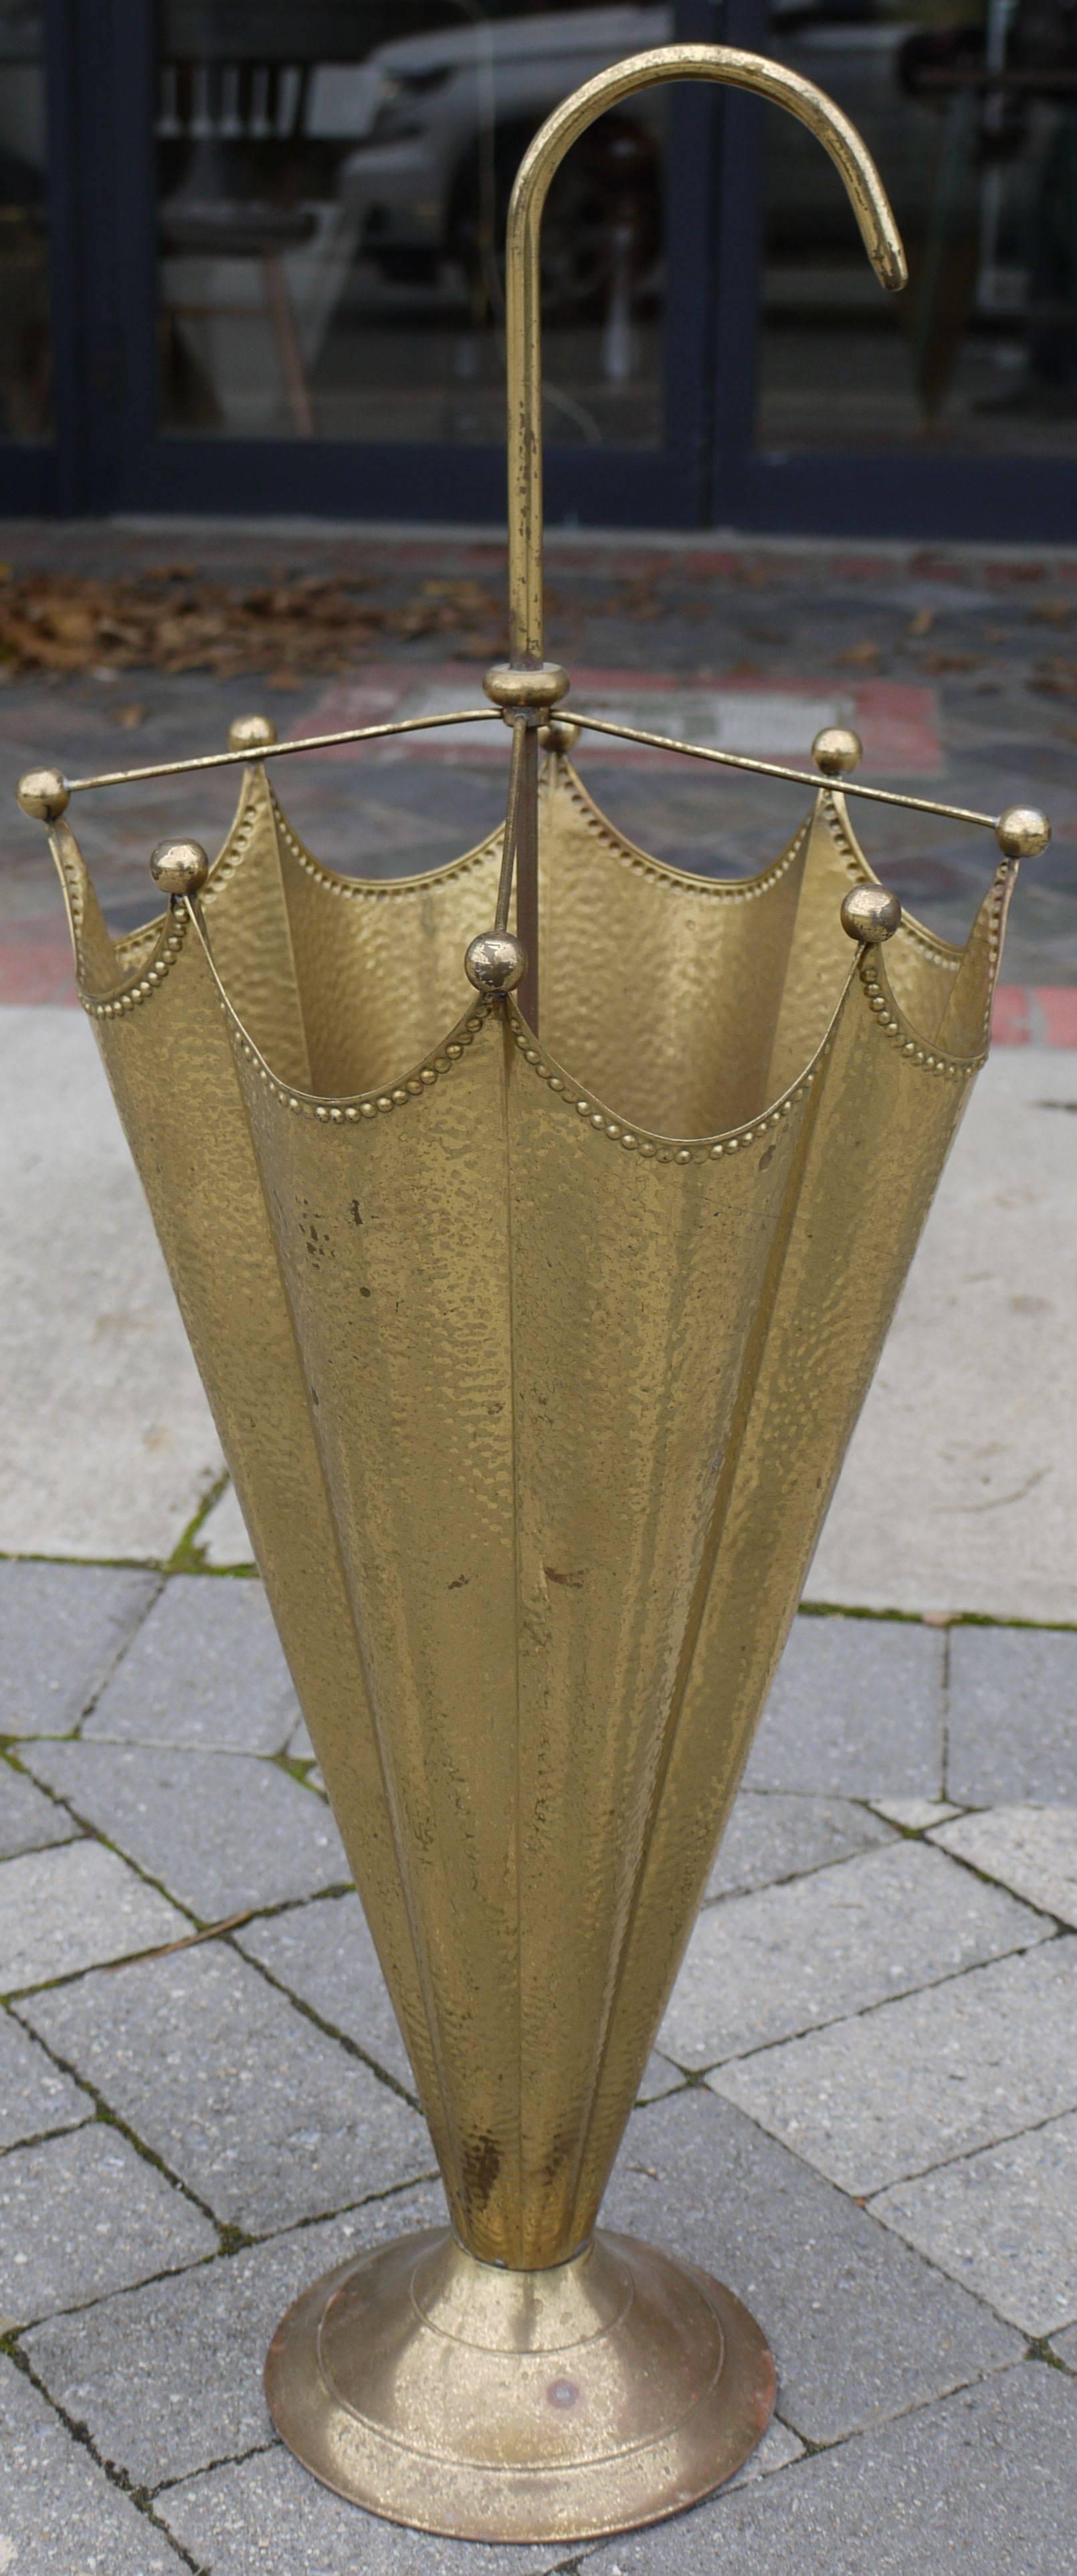 Whimsical brass umbrella shaped umbrella stand made in France in the 1940s, with hammered brass sides and a beaded edge.